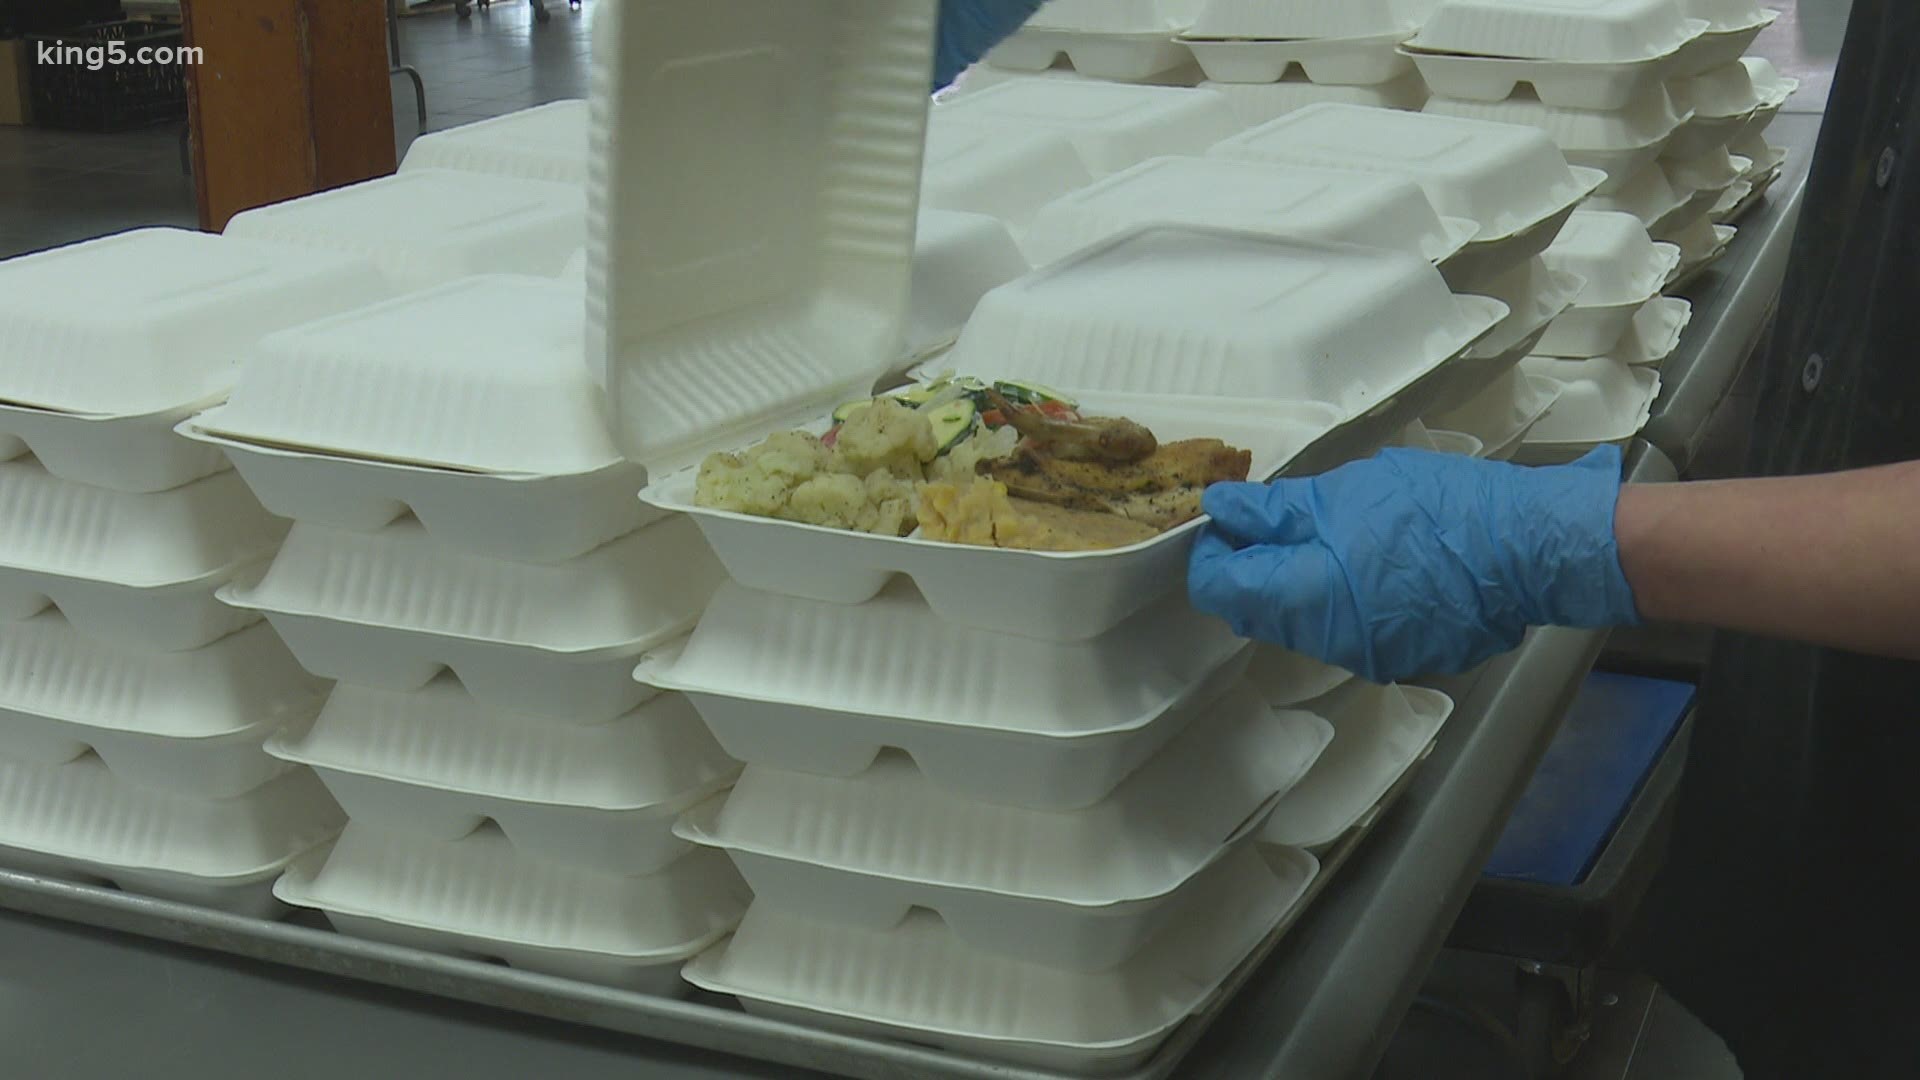 OSL Seattle and Uplift Northwest are partnering to prepare hundreds of meals that will be passed out on Thanksgiving day to help those in need.